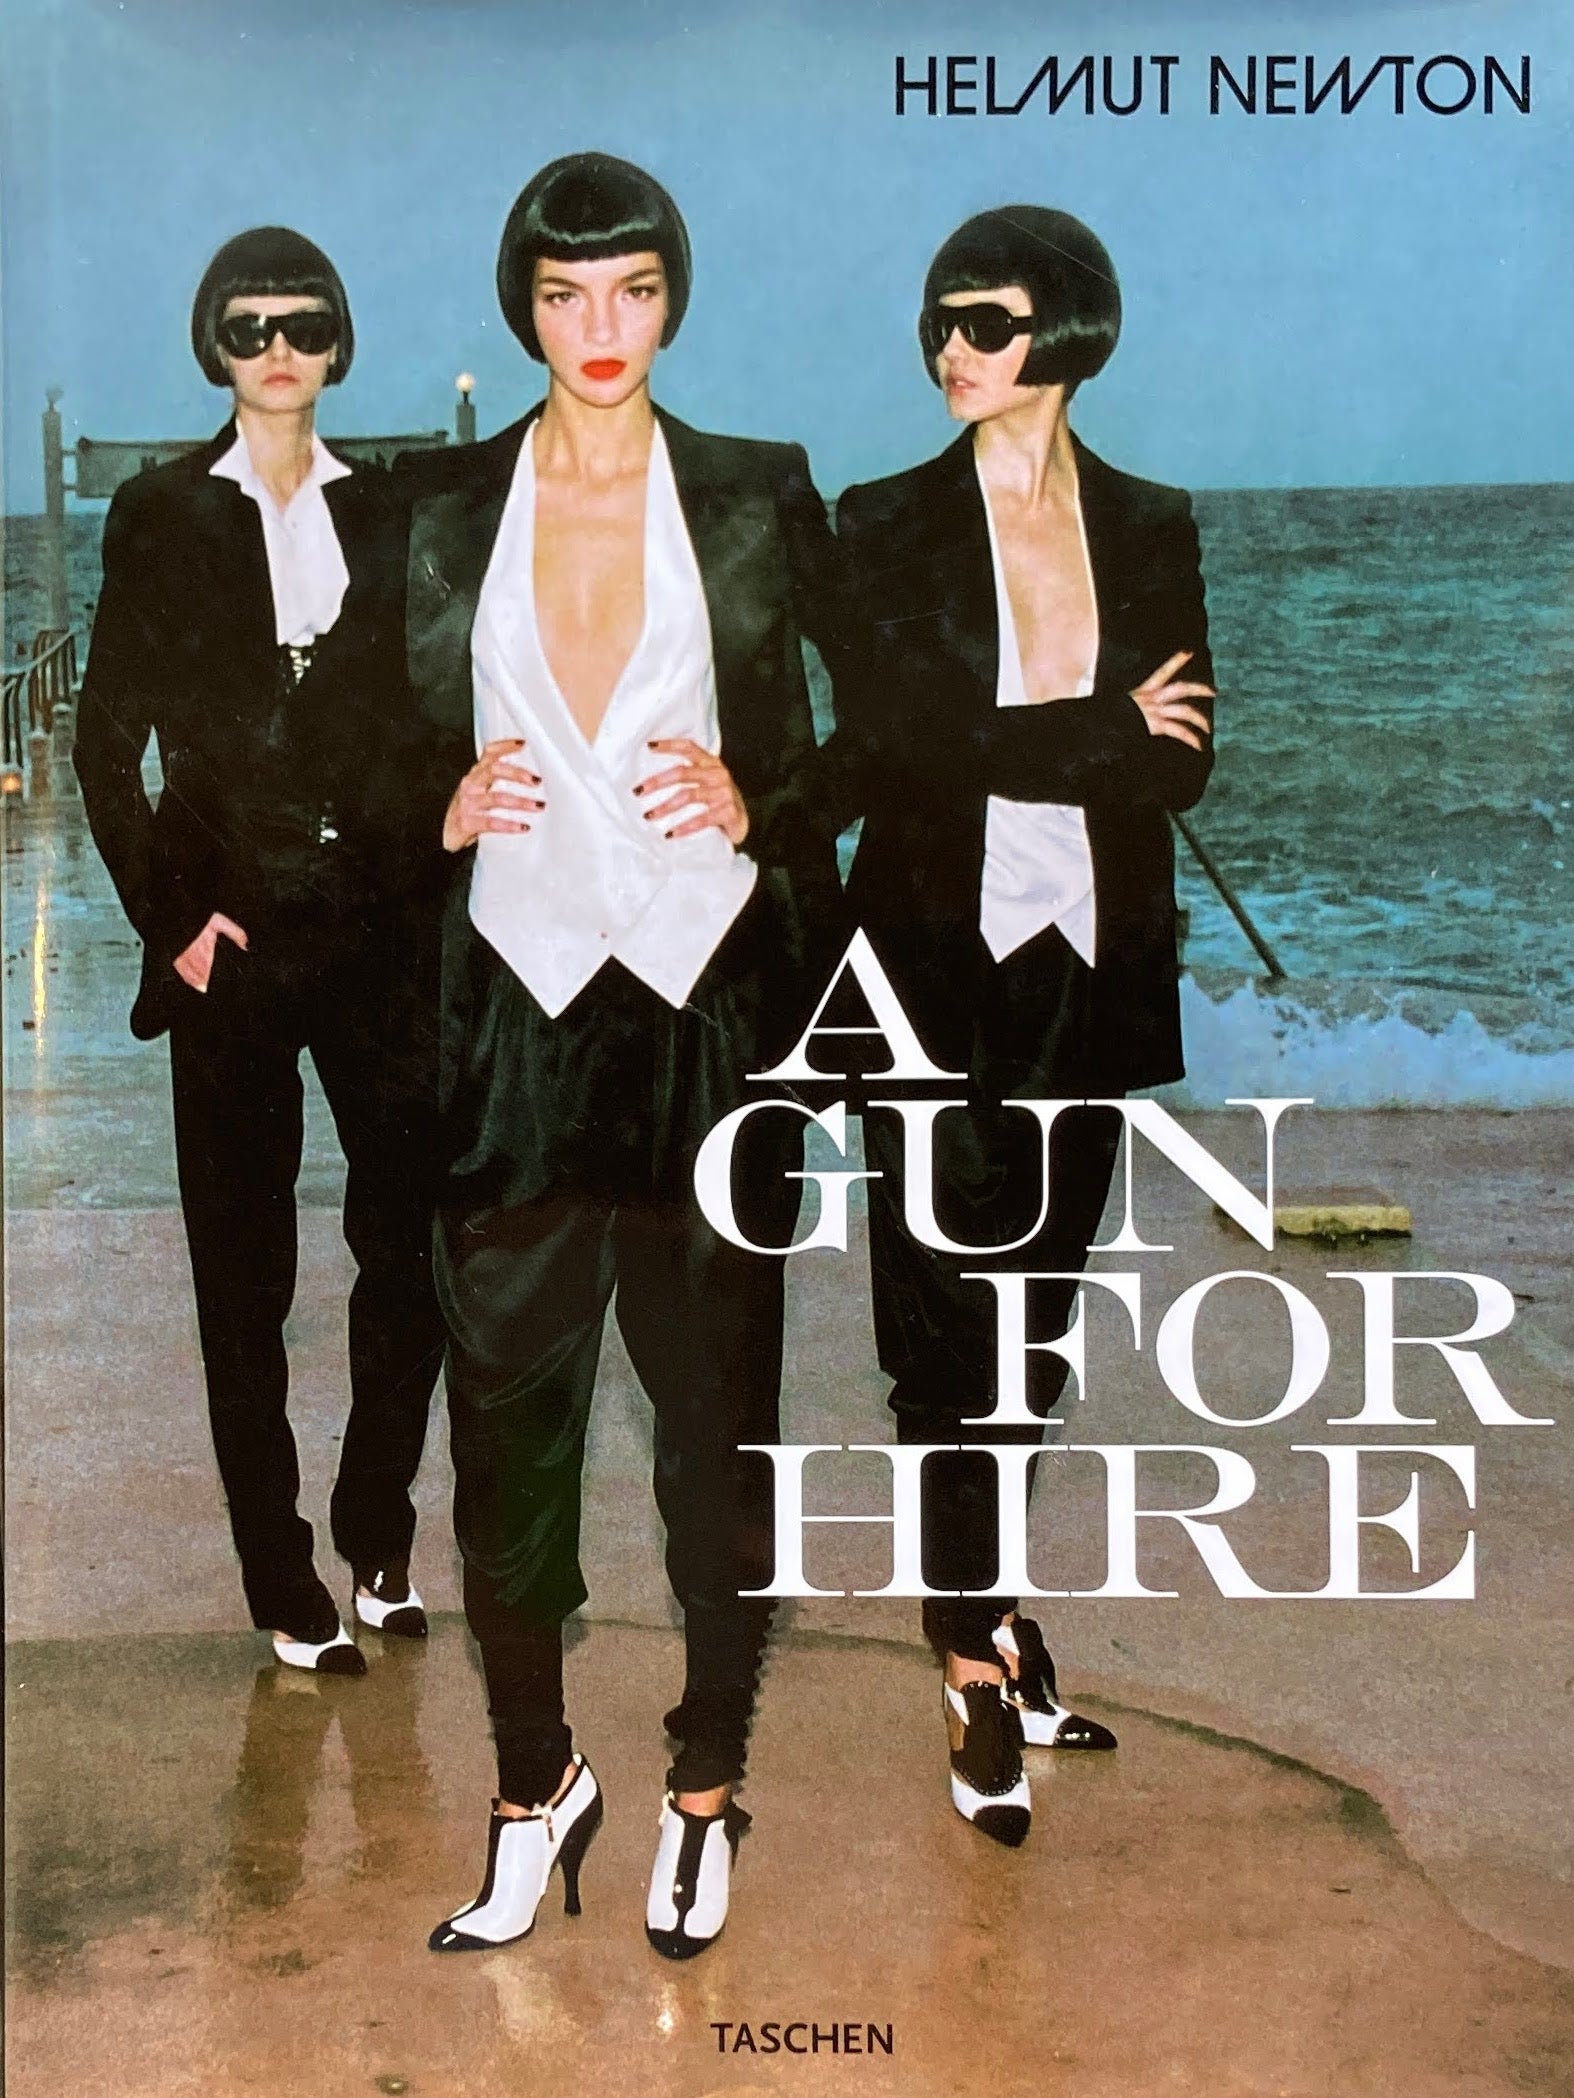 A GUN FOR HIRE HELMUT NEWTON ヘルムート・ニュートン – smokebooks shop